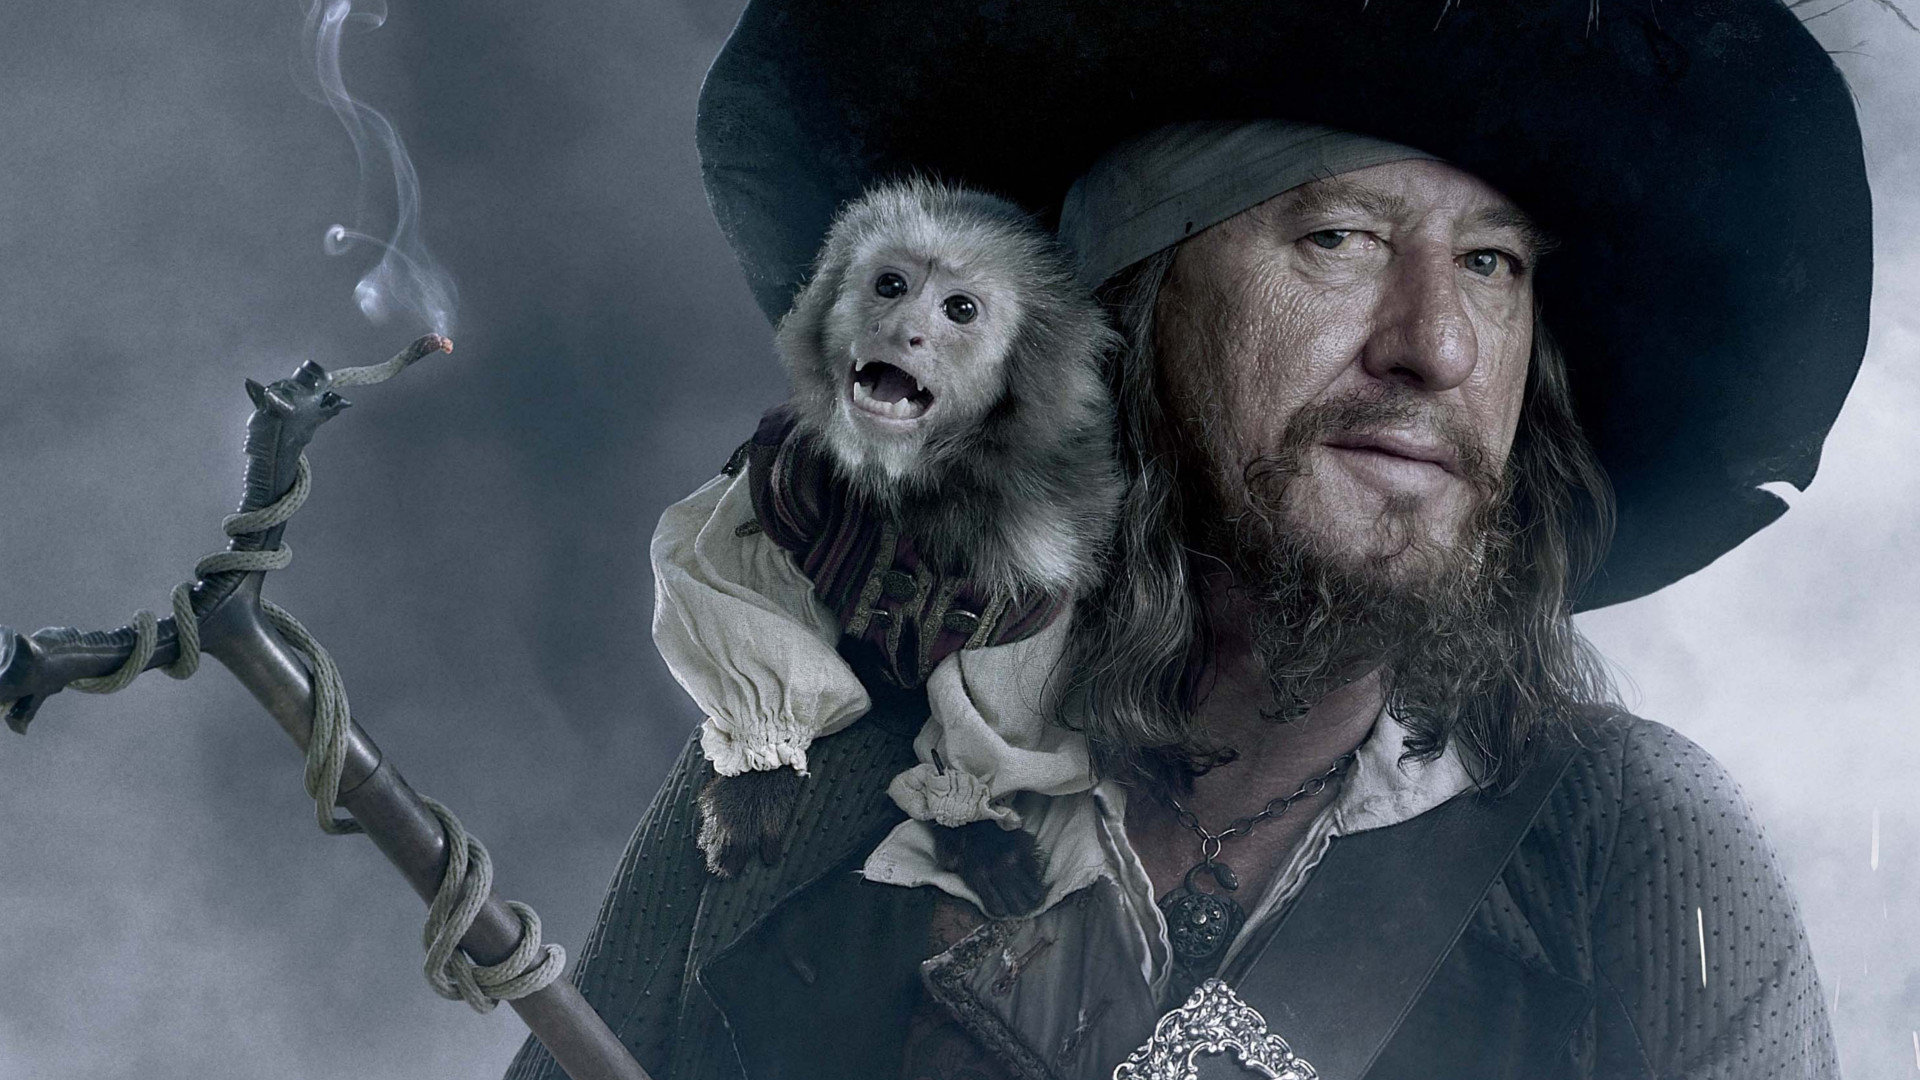 Who are the Best Pirates of the Caribbean Characters? - Bare Foots World